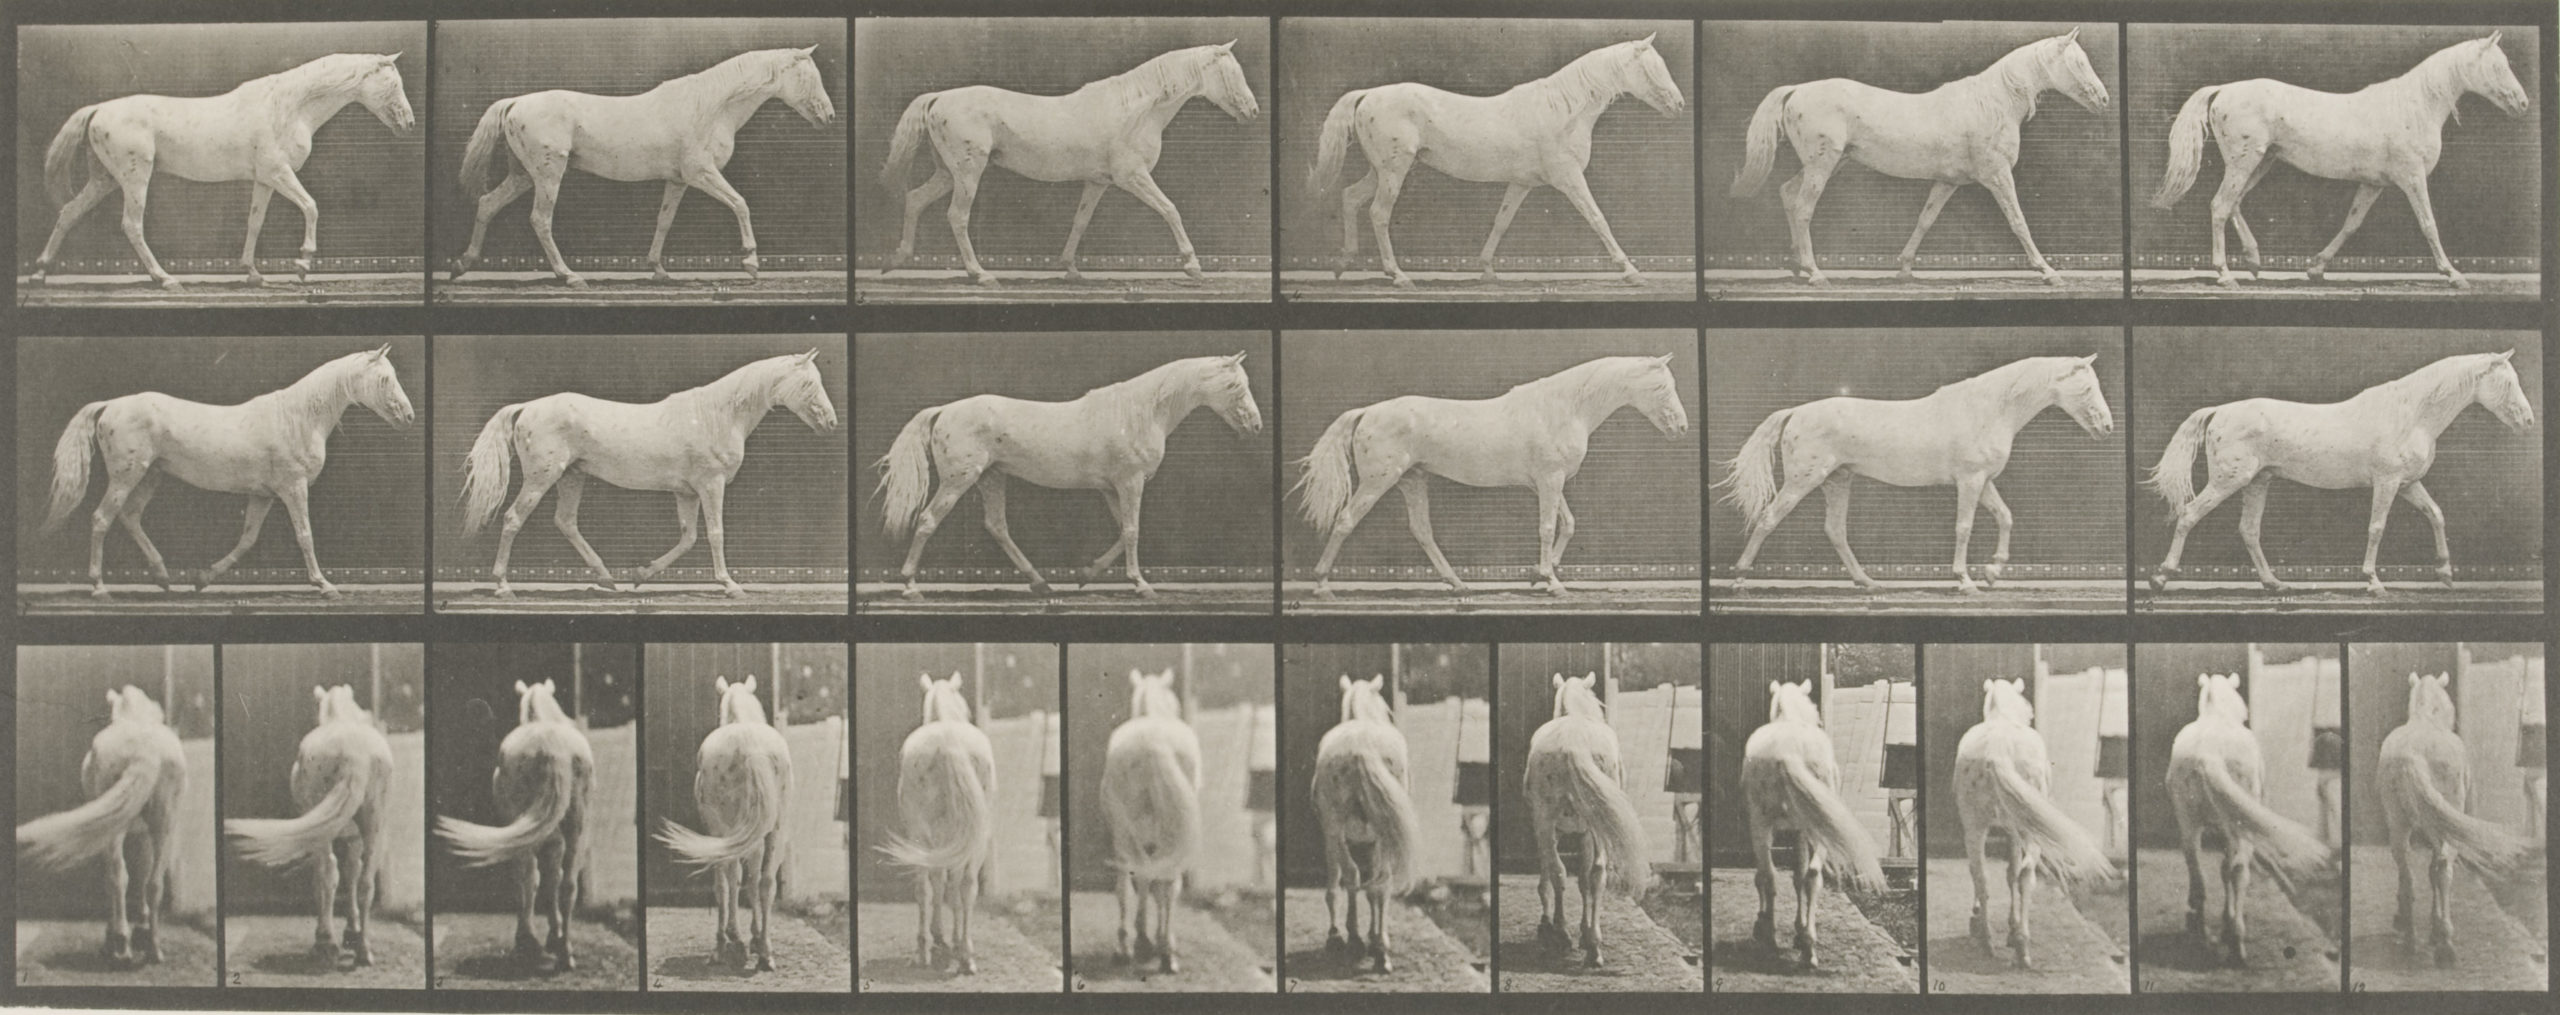 Photograph of a horse from various angles 